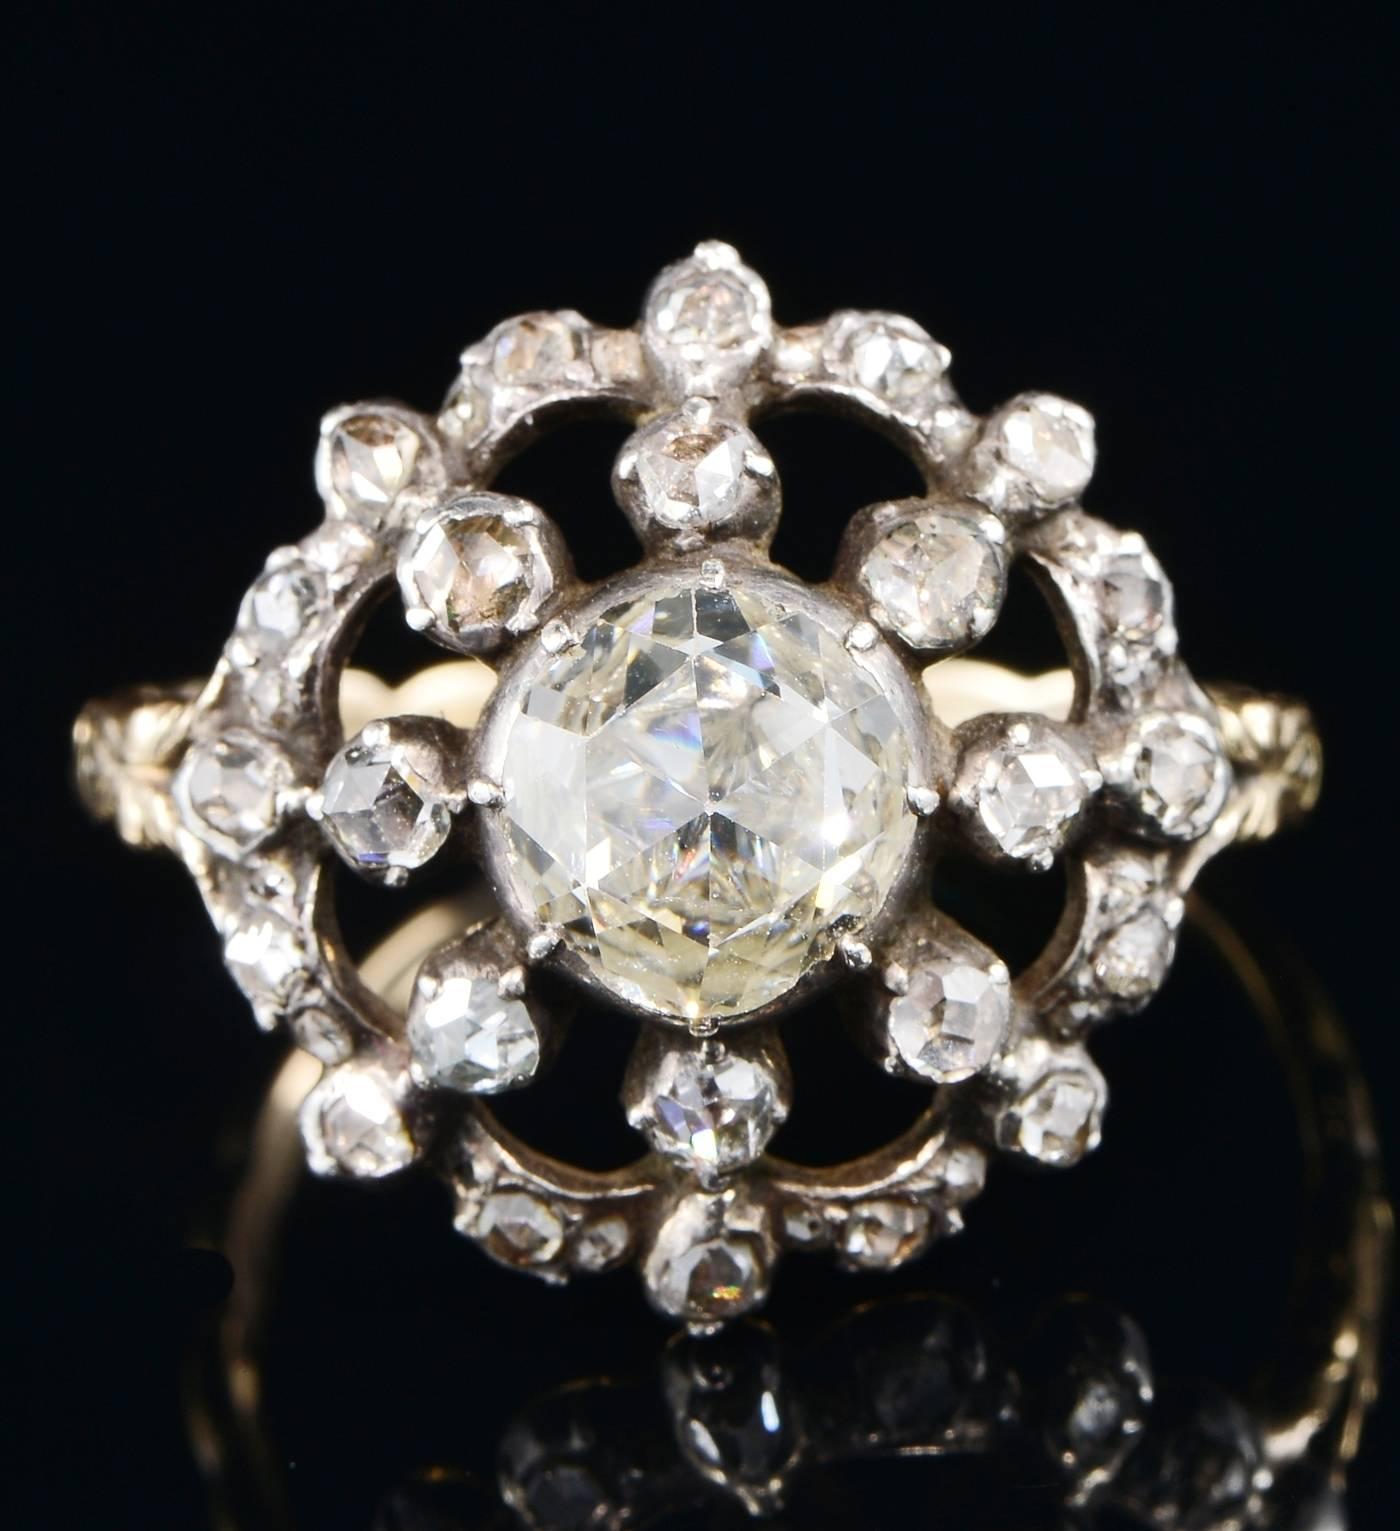 A marvellous example of an original Georgian ring in very good condition and perfectly wearable.
Round shaped of flower inspiration crowned by a large rose cut Diamond set in the middle point this spreads as much as 1.50 Ct measured by the diameter